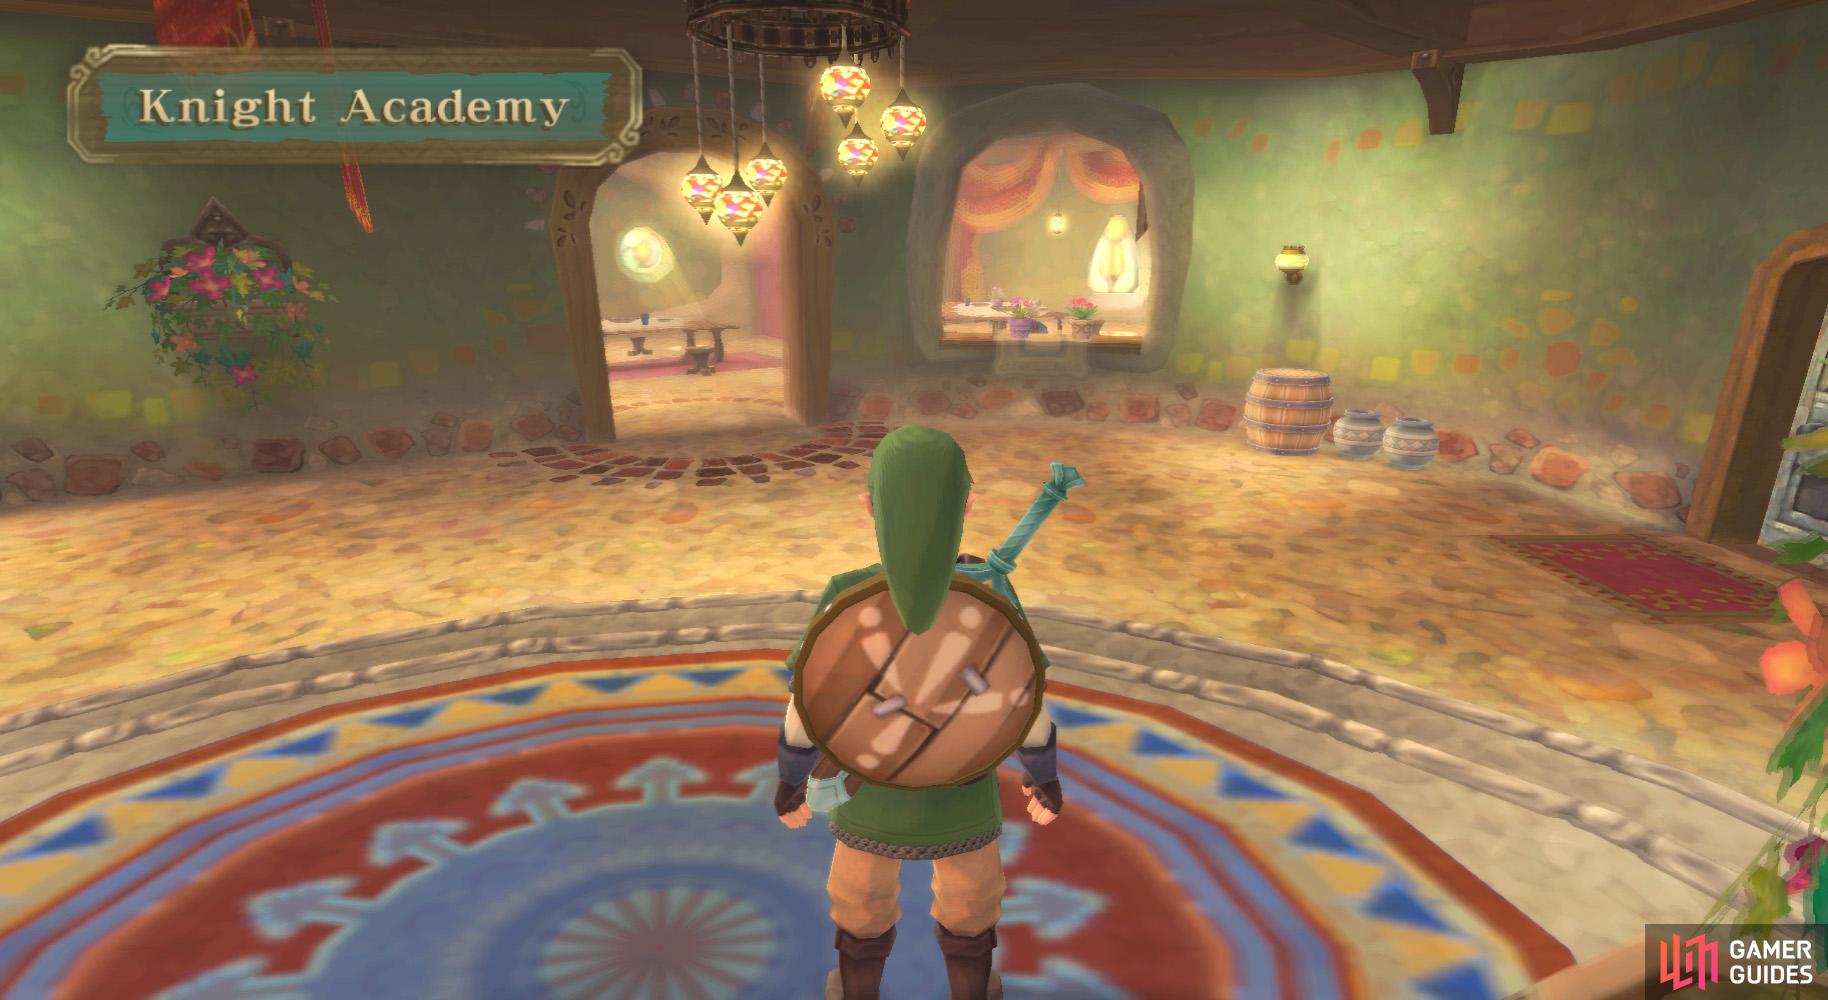 You'll begin the game inside the Knight Academy.